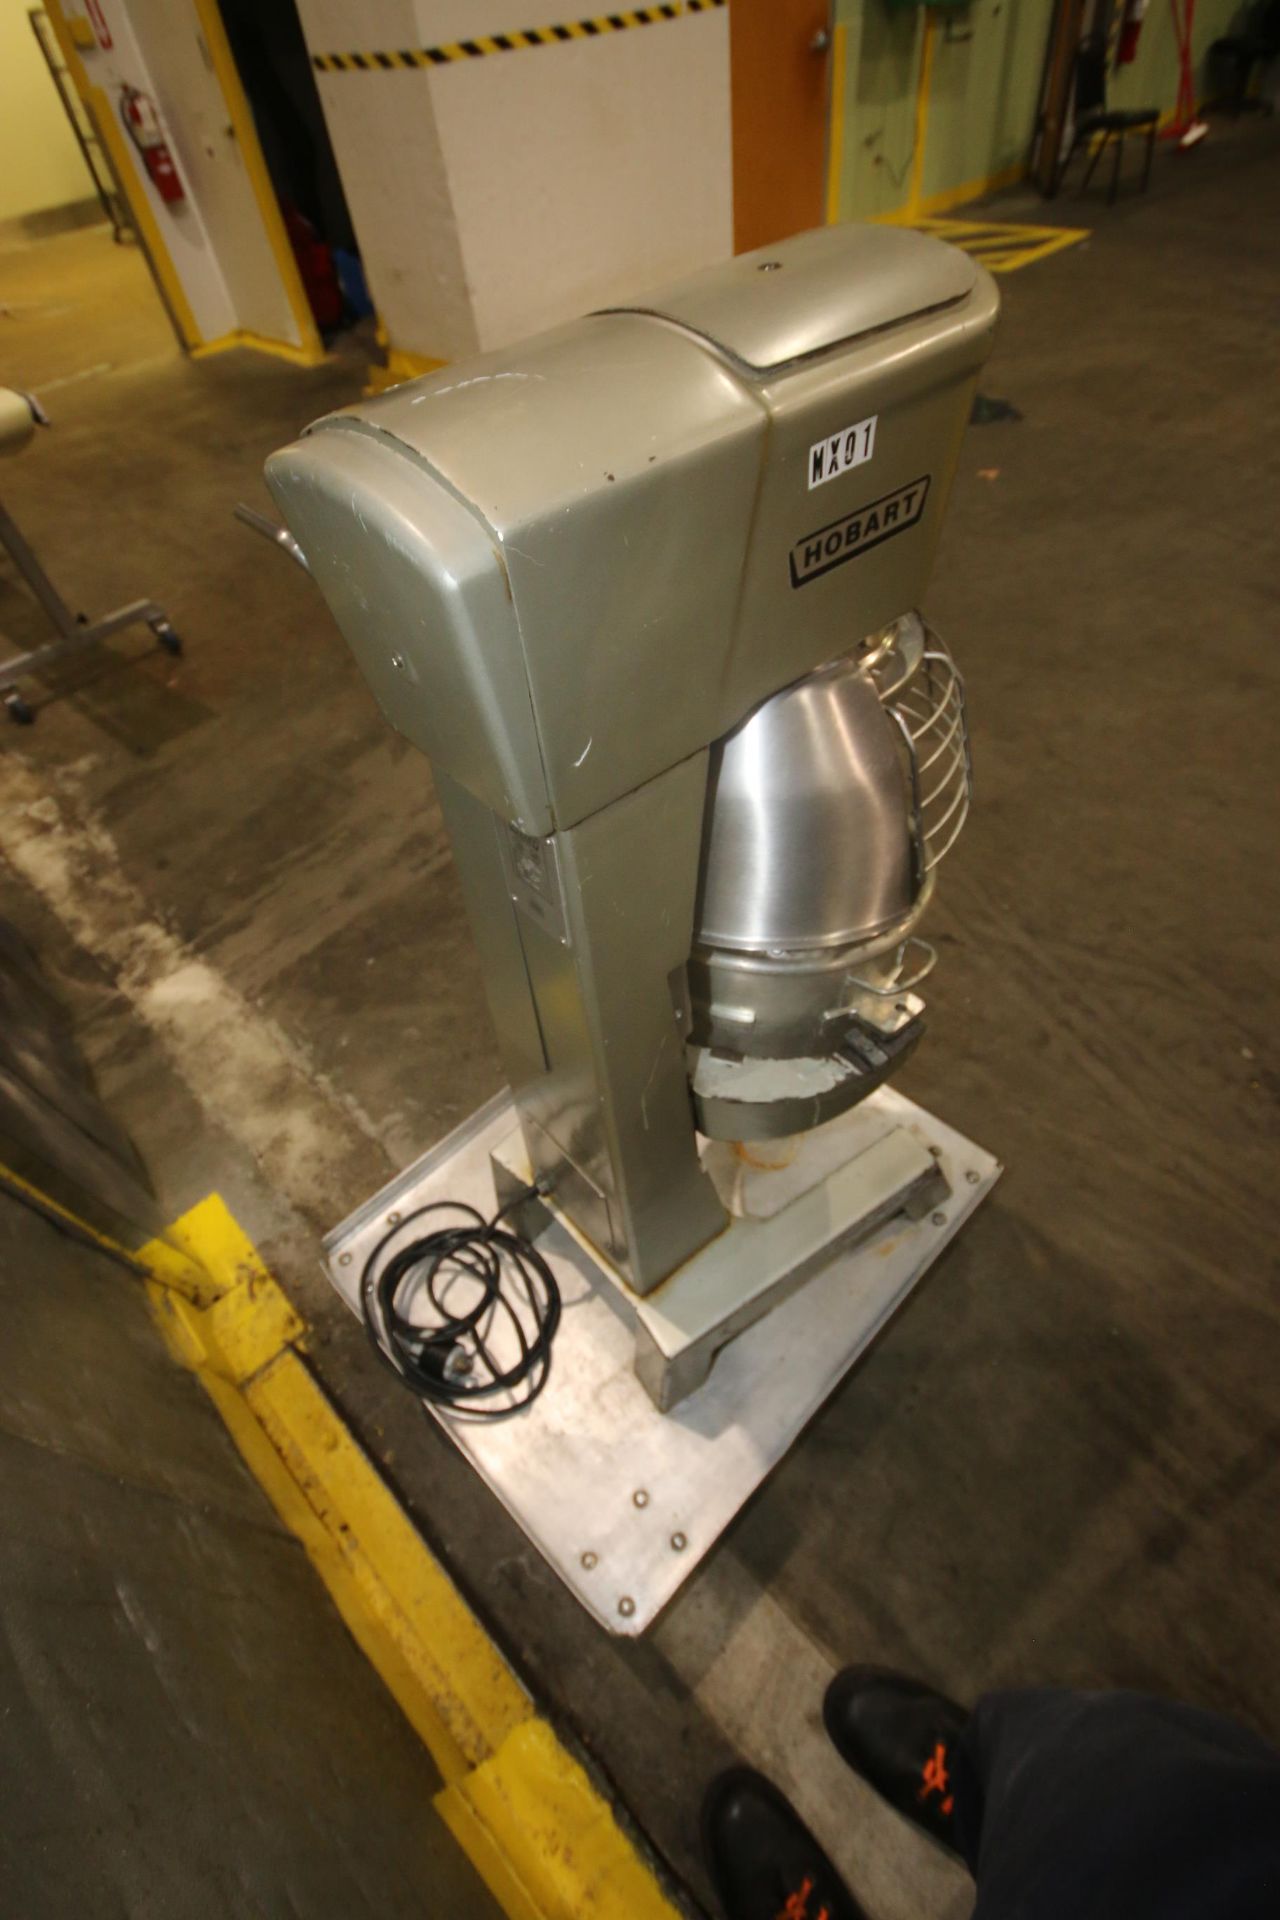 Hobart Mixer, M/N D 3001, S/N 11-245-583, 200 Volts, 1725 RPM, with S/S Mixing Bowl, Includes Whip - Image 7 of 8